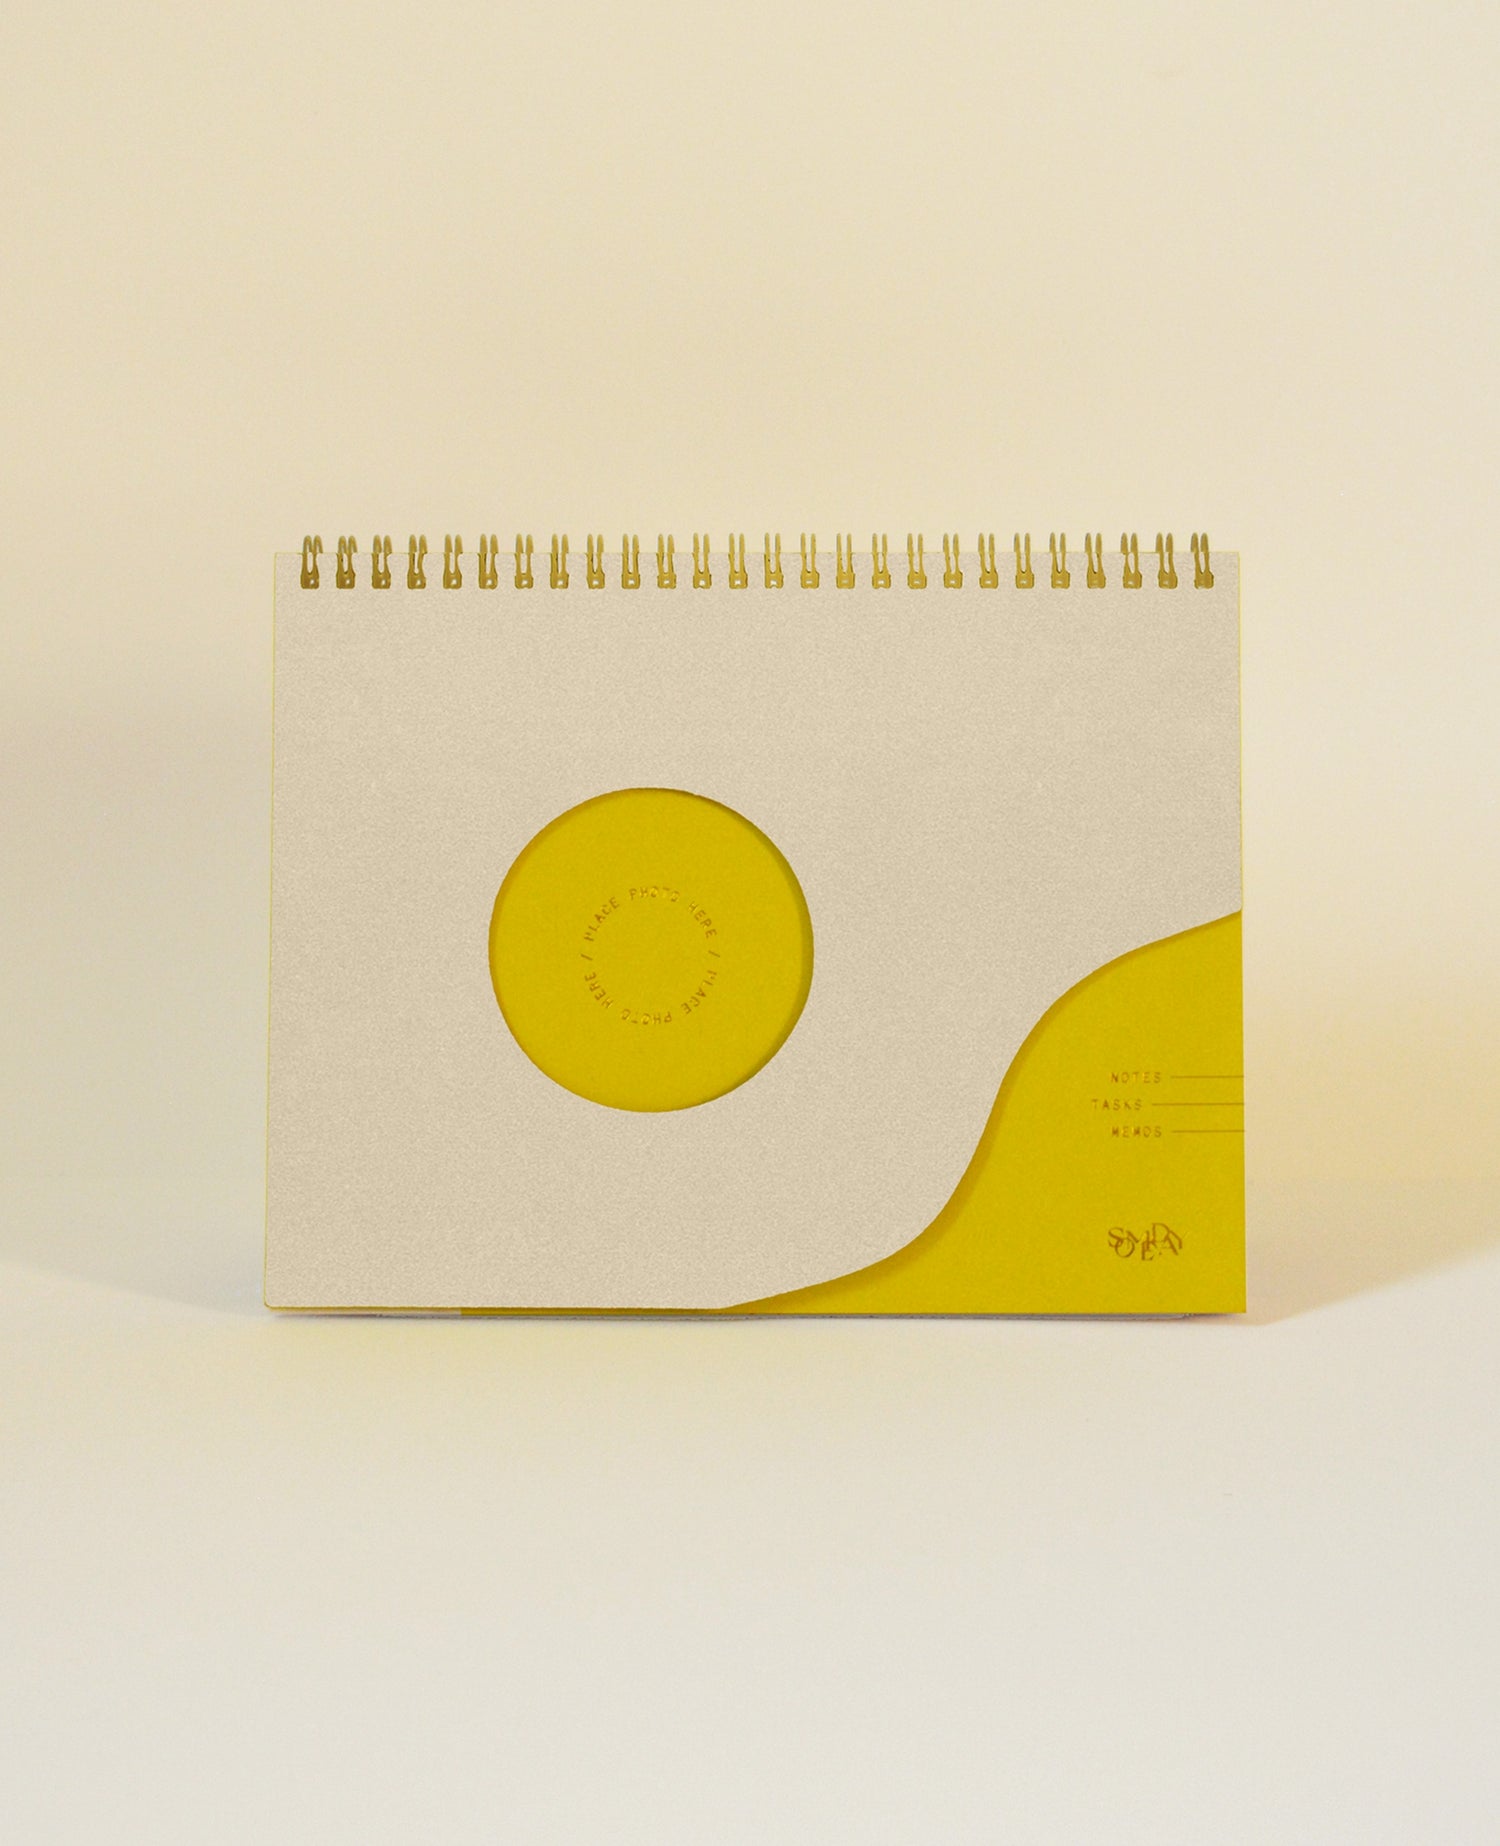 Imagine if a notebook and a planner had a baby—that's the Jotter. This undated jotter can be used any time of year to put your thoughts onto paper. Top-bound in gold wire, the pages lay flat with space to track your notes, tasks and memos. 